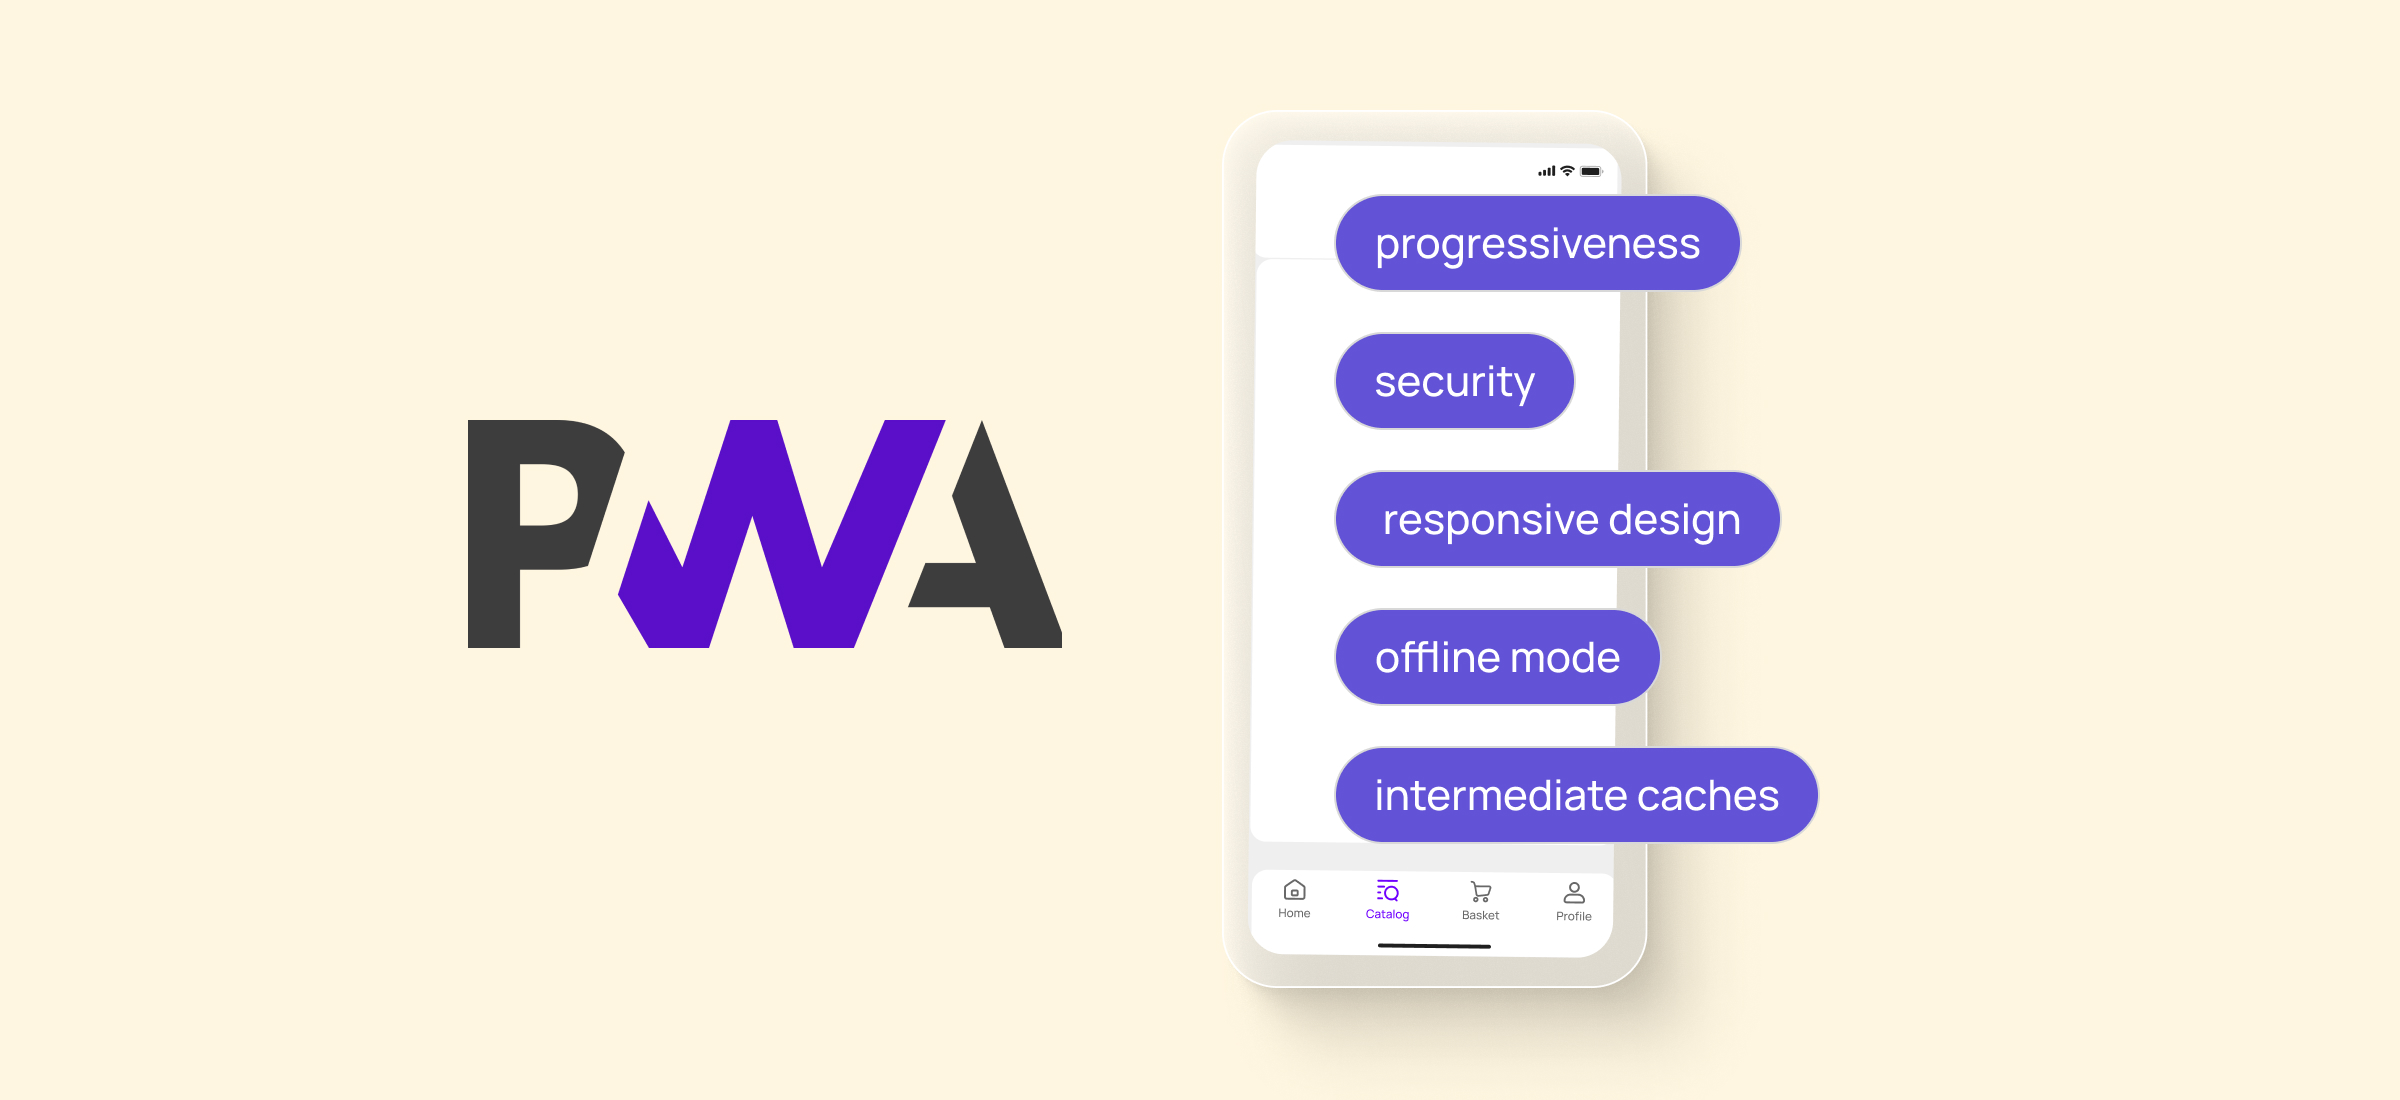 PWA Application features